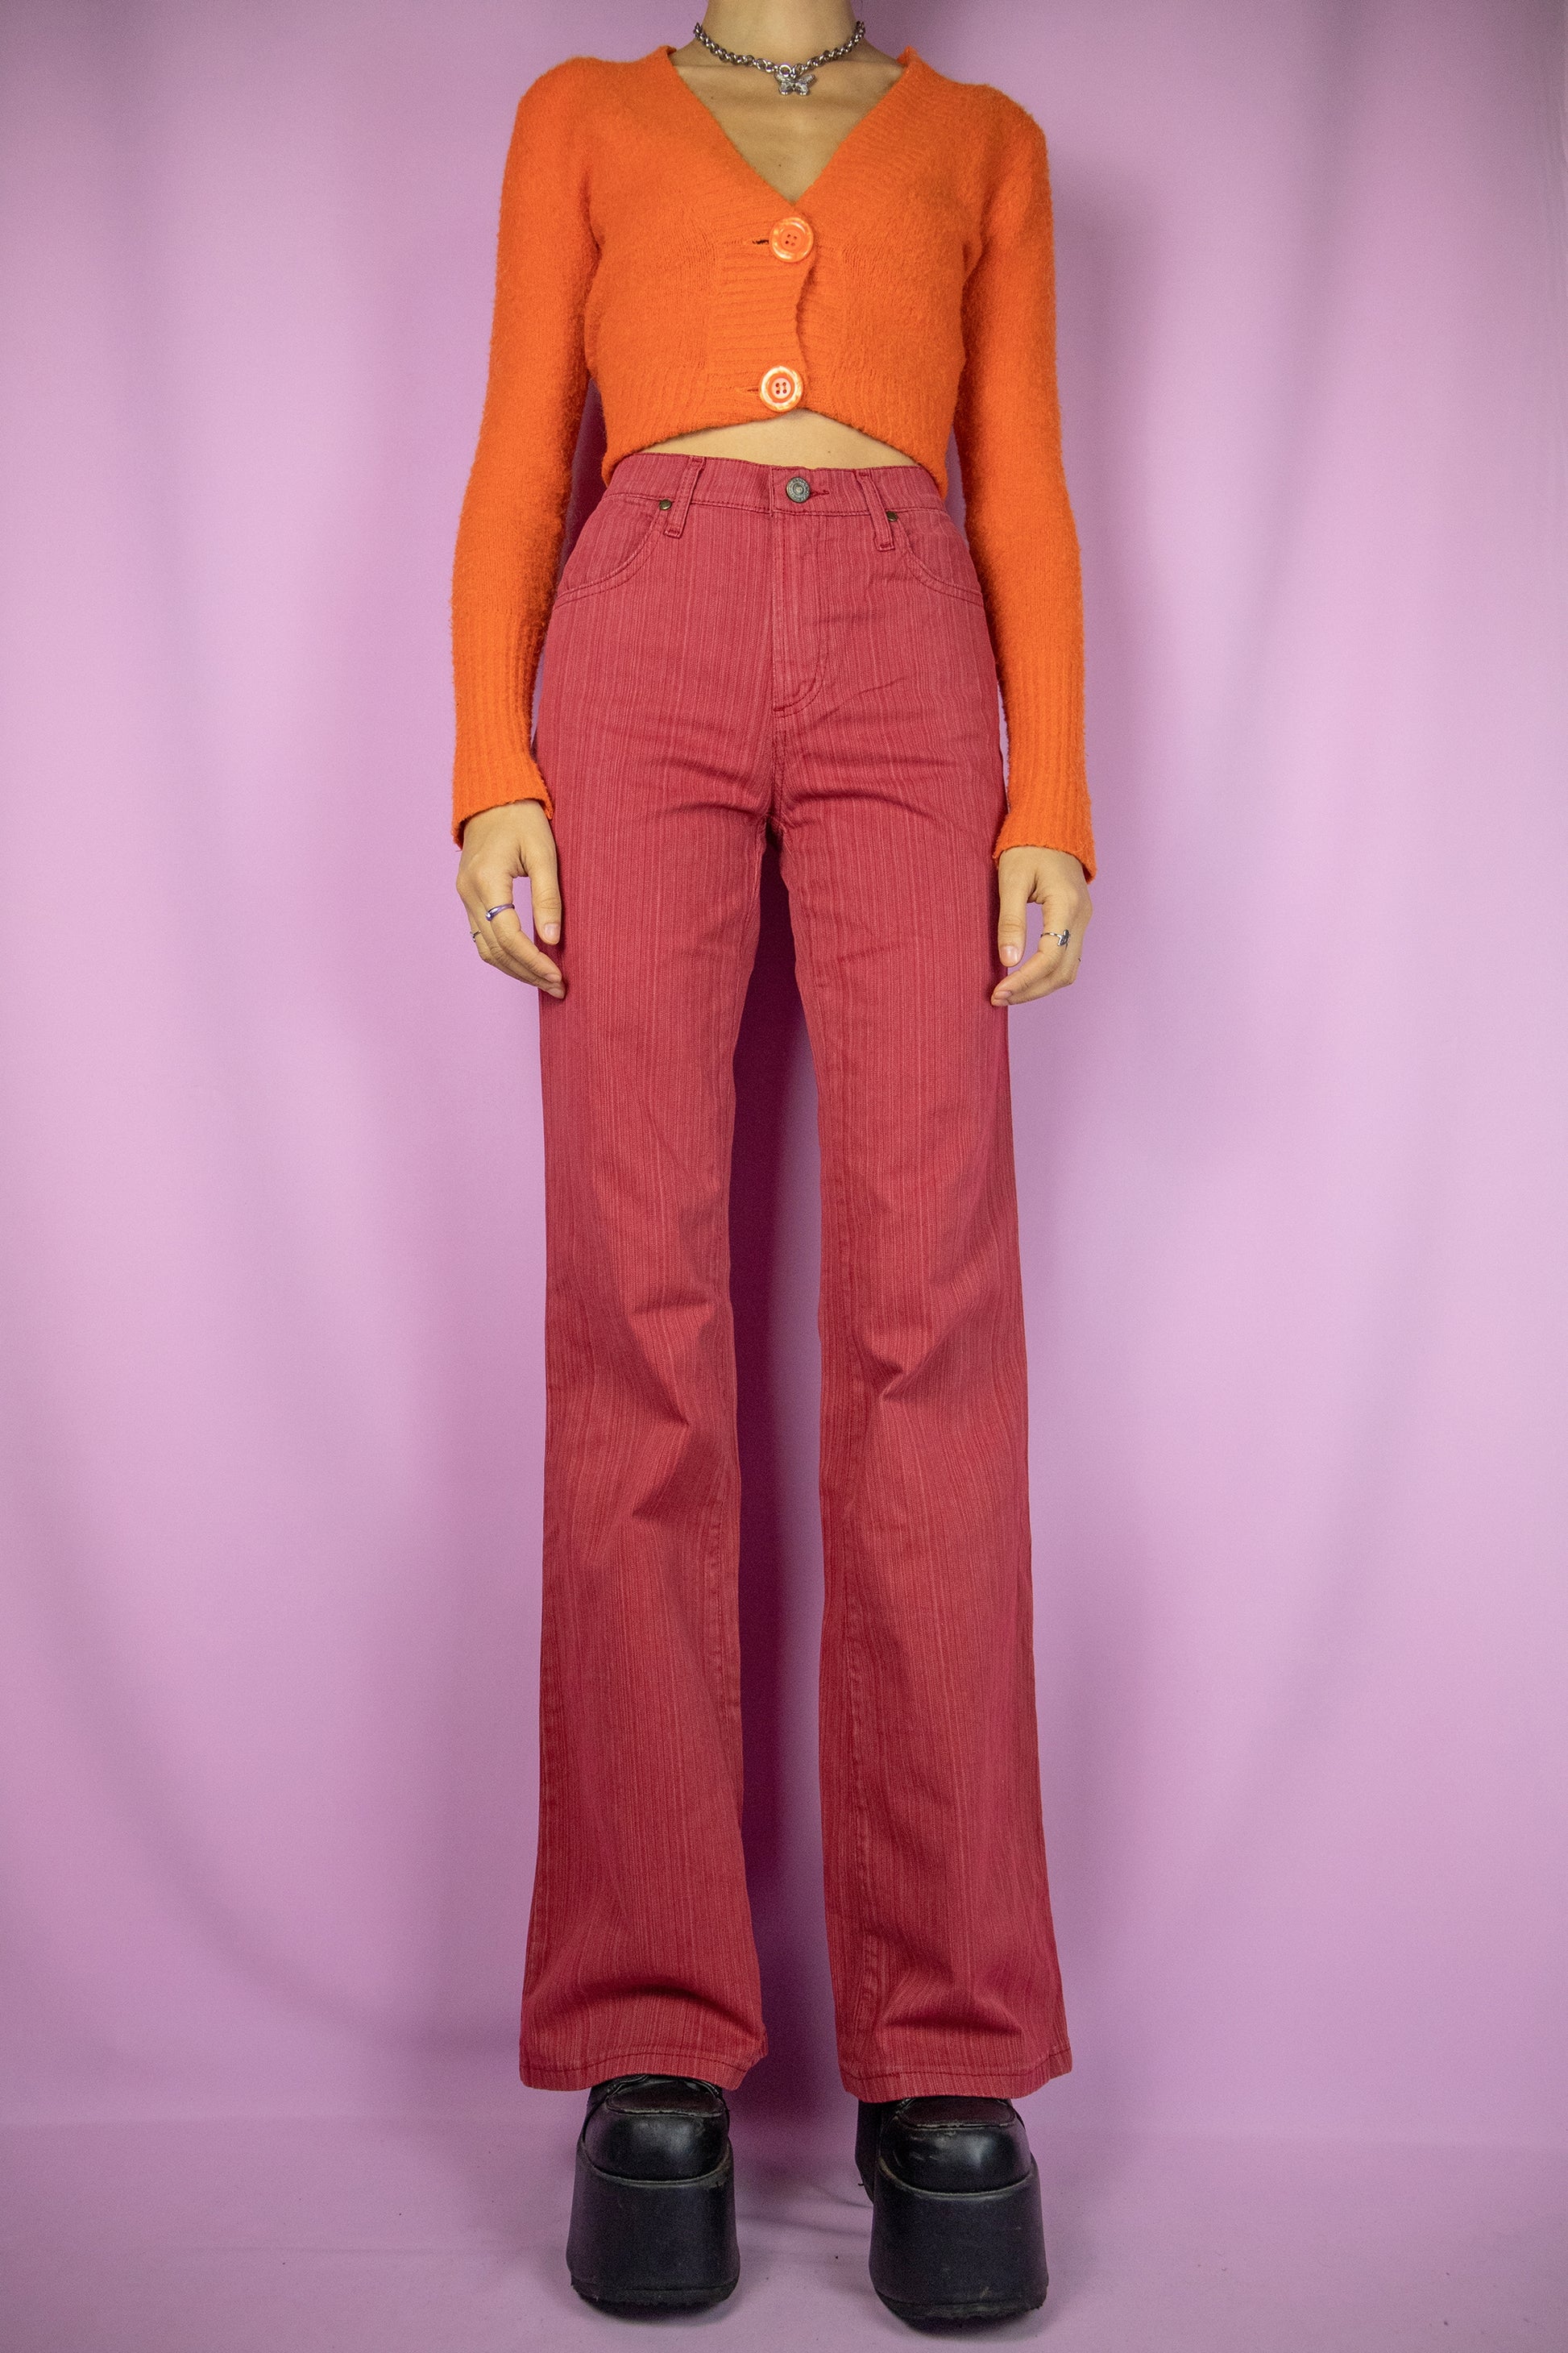 The Vintage Y2K Red Flare Jeans are slightly stretchy wide flared red striped pants with pockets. Cute 2000s cyber trousers.